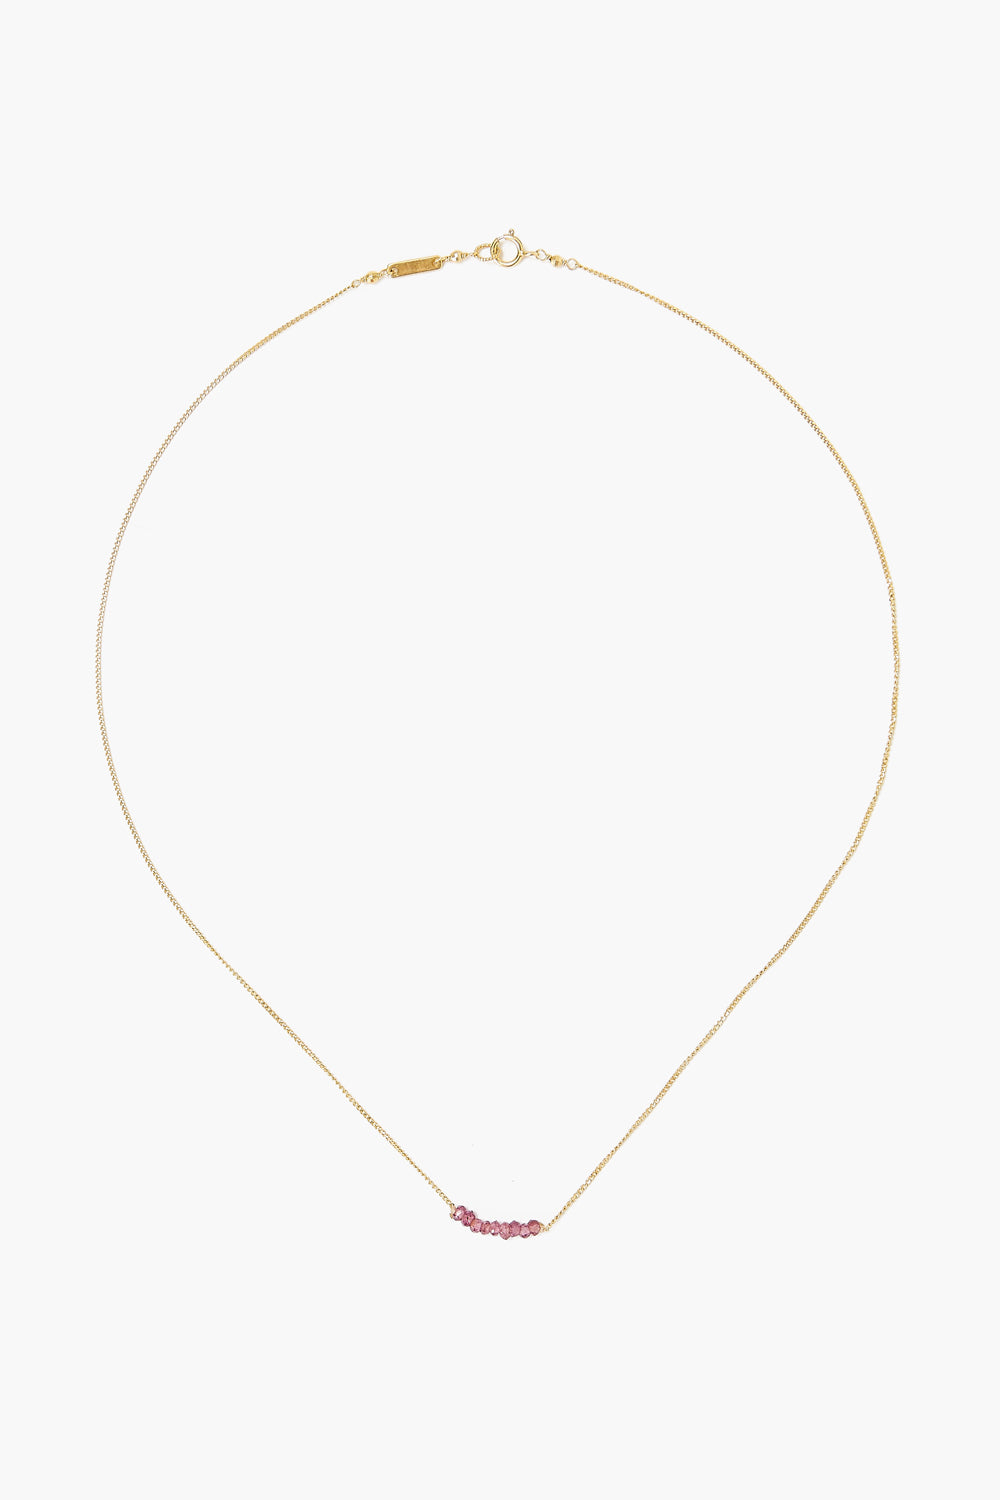 16' DAINTY FACTED  STONES NECKLACE - Kingfisher Road - Online Boutique